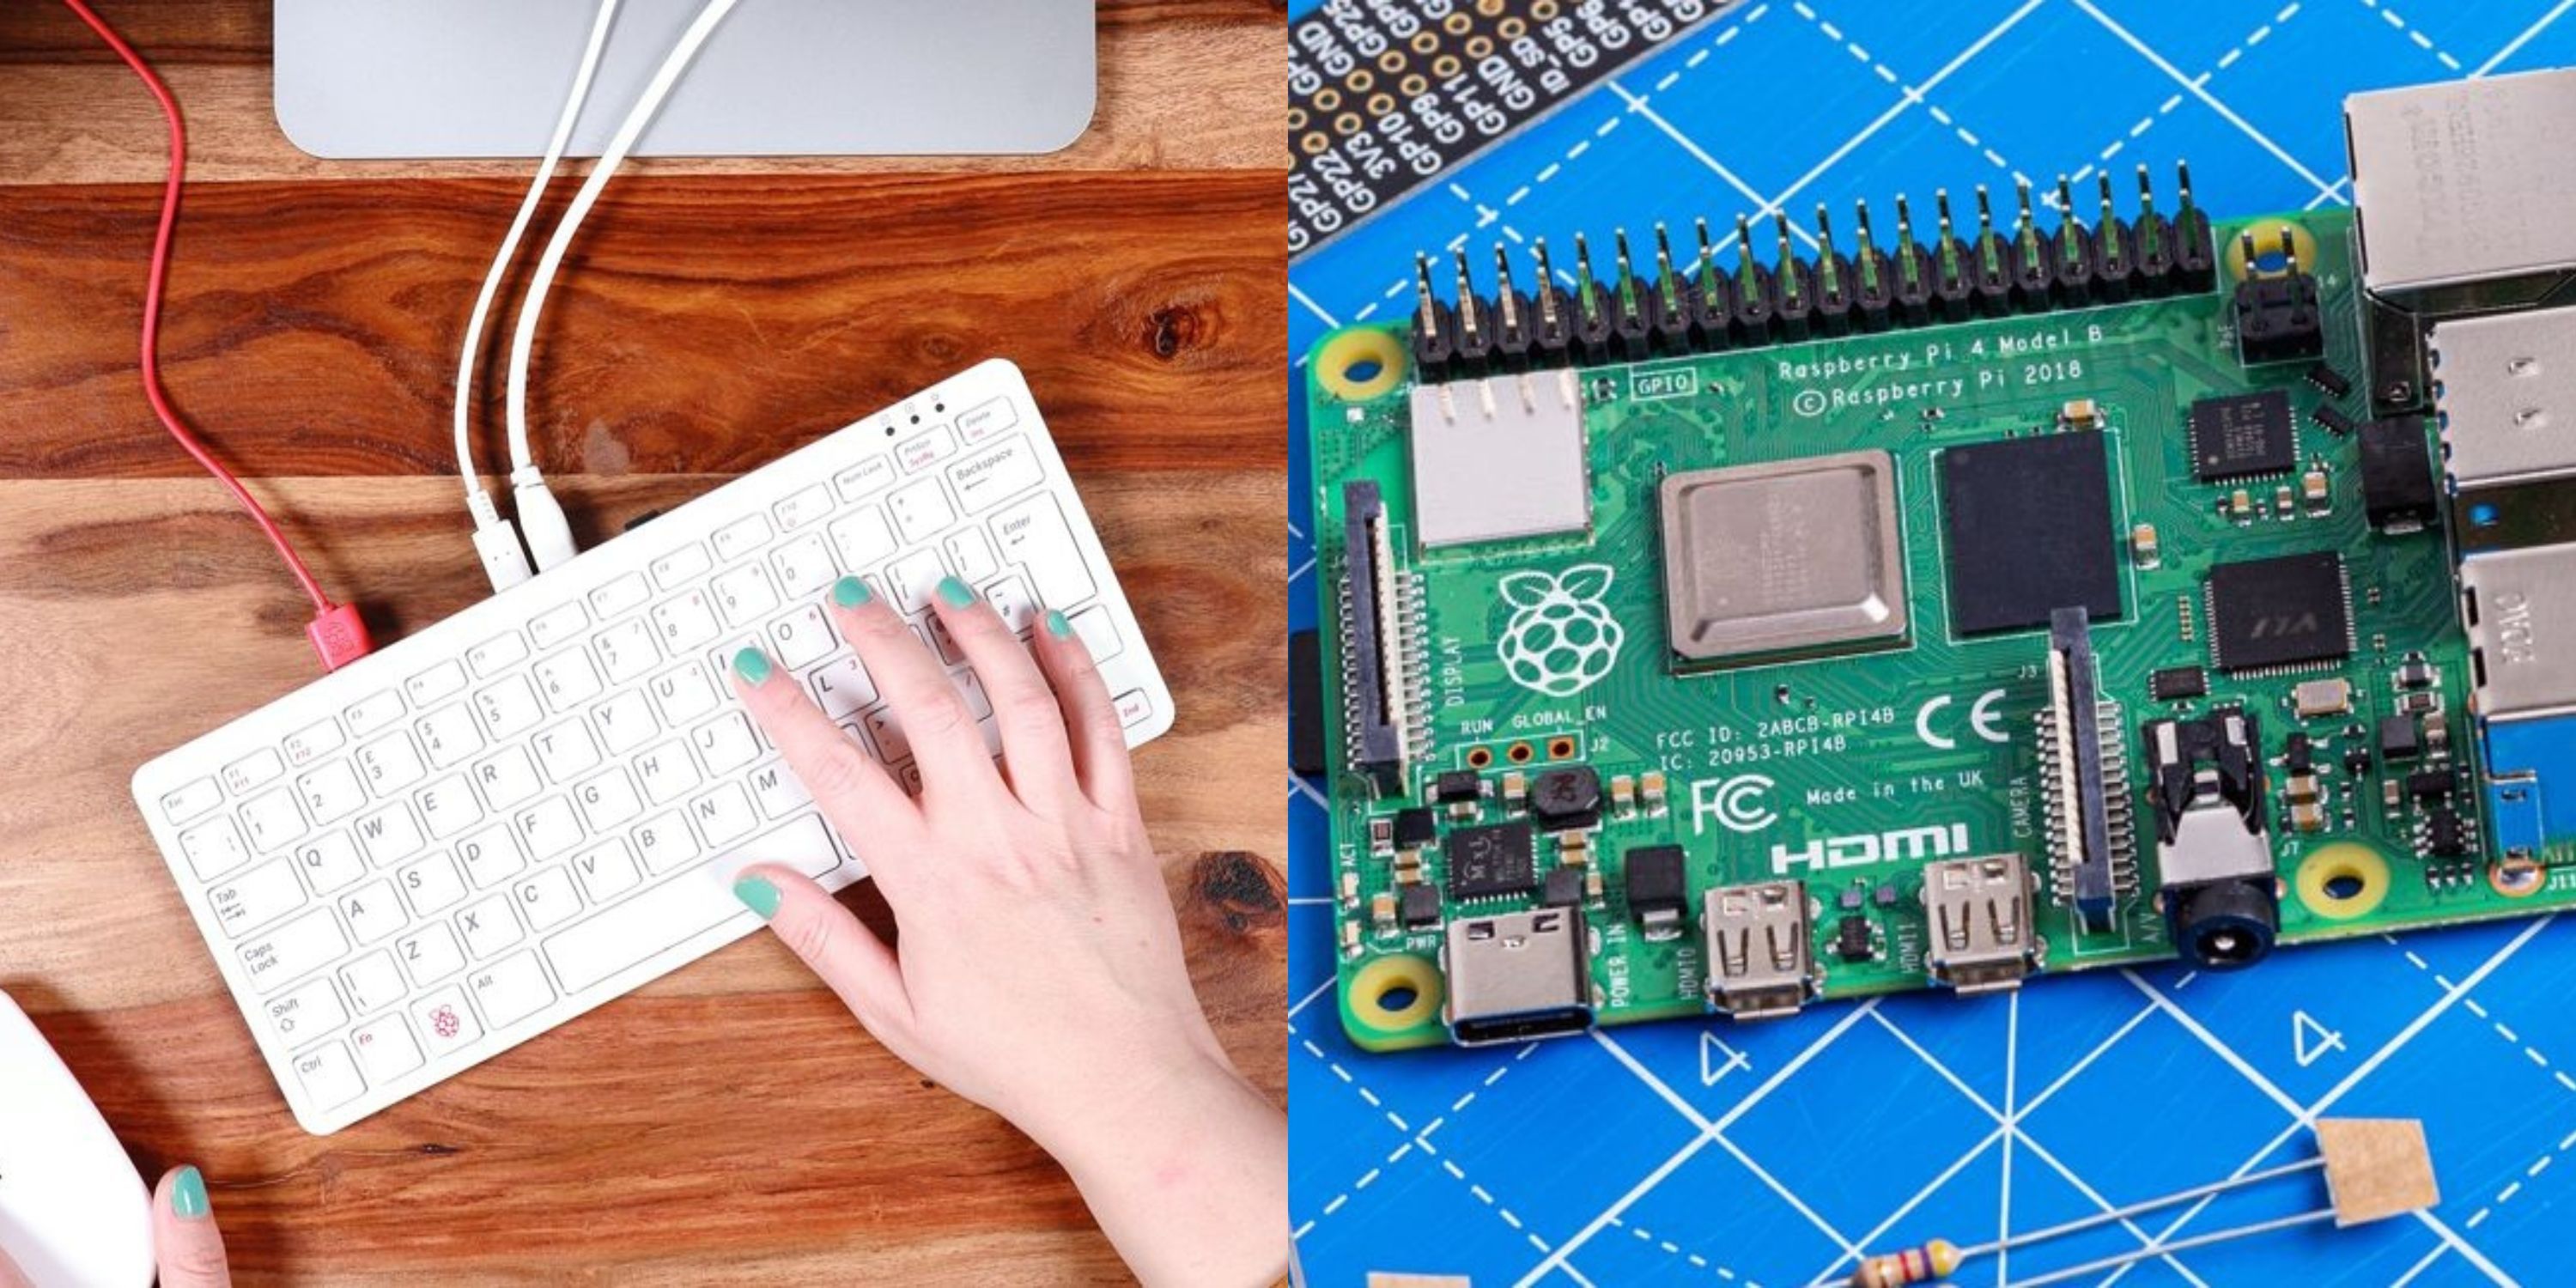 10 Clever Uses For Raspberry Pi, According To Reddit